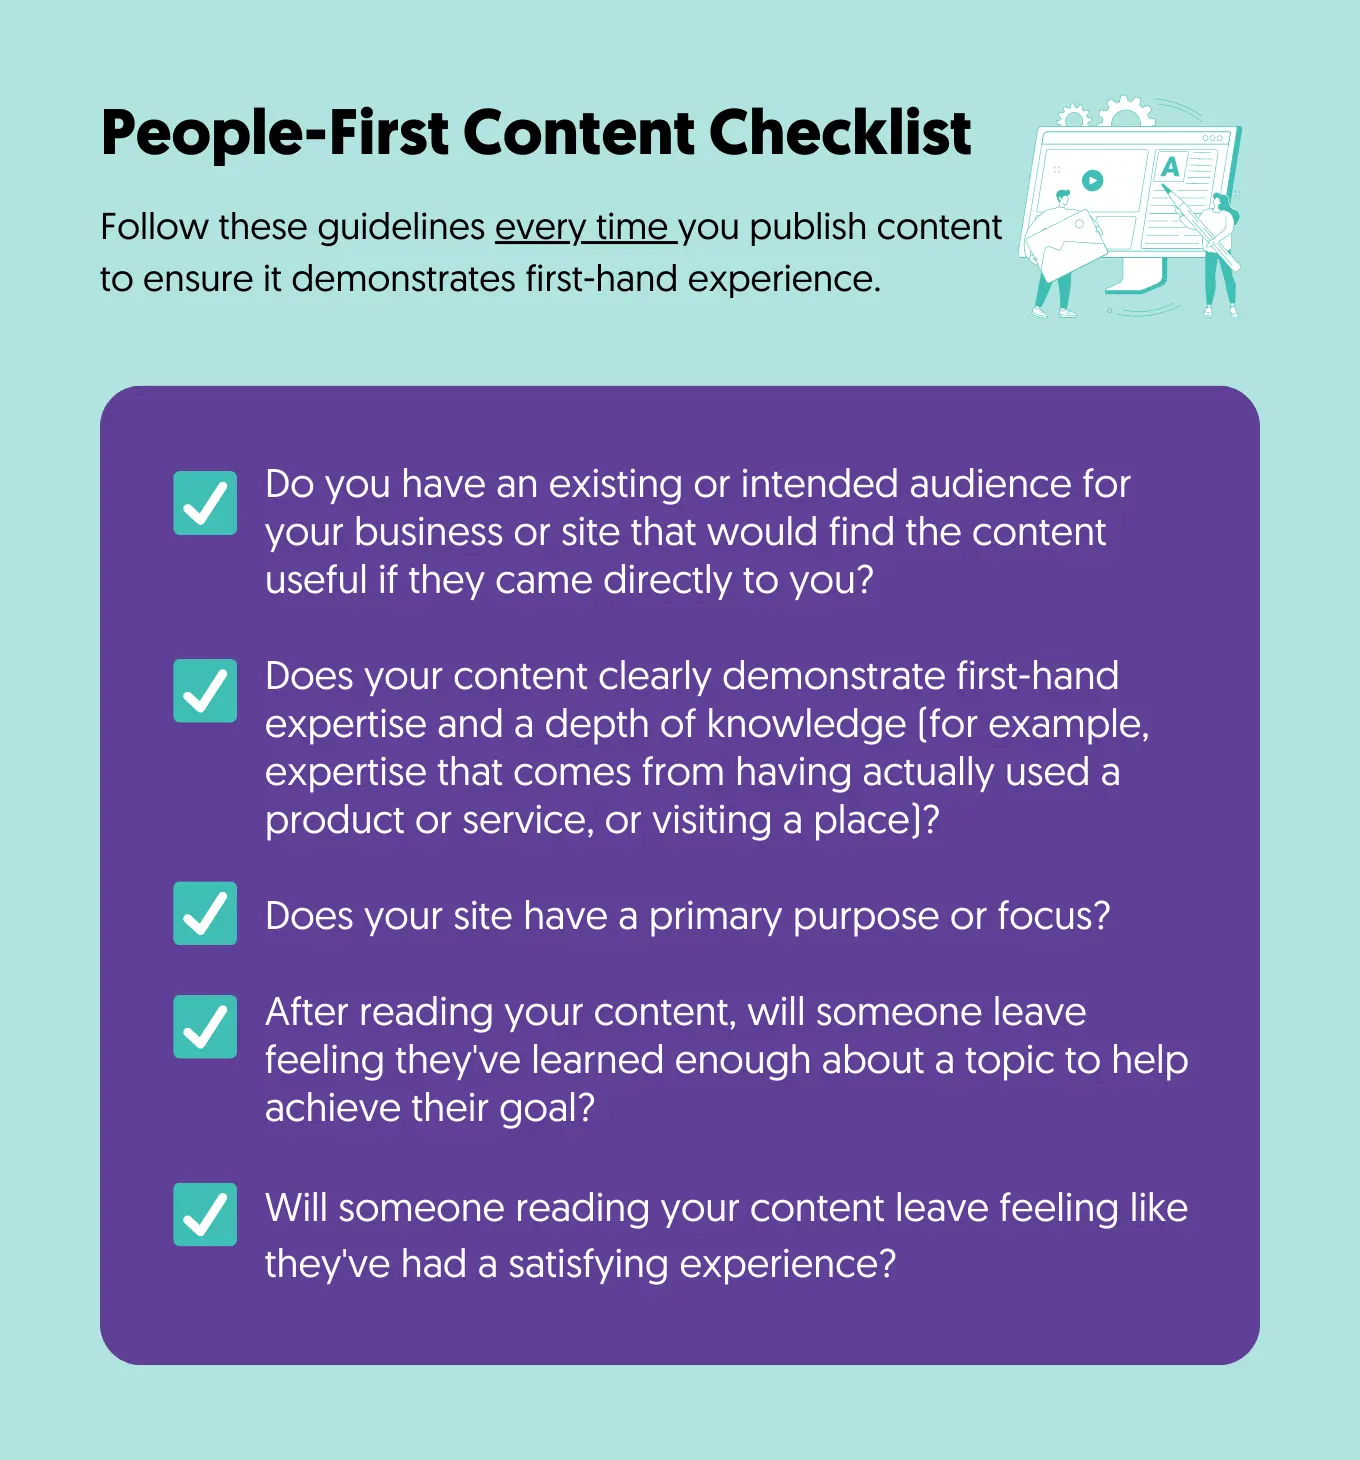 People-First Content Checklist